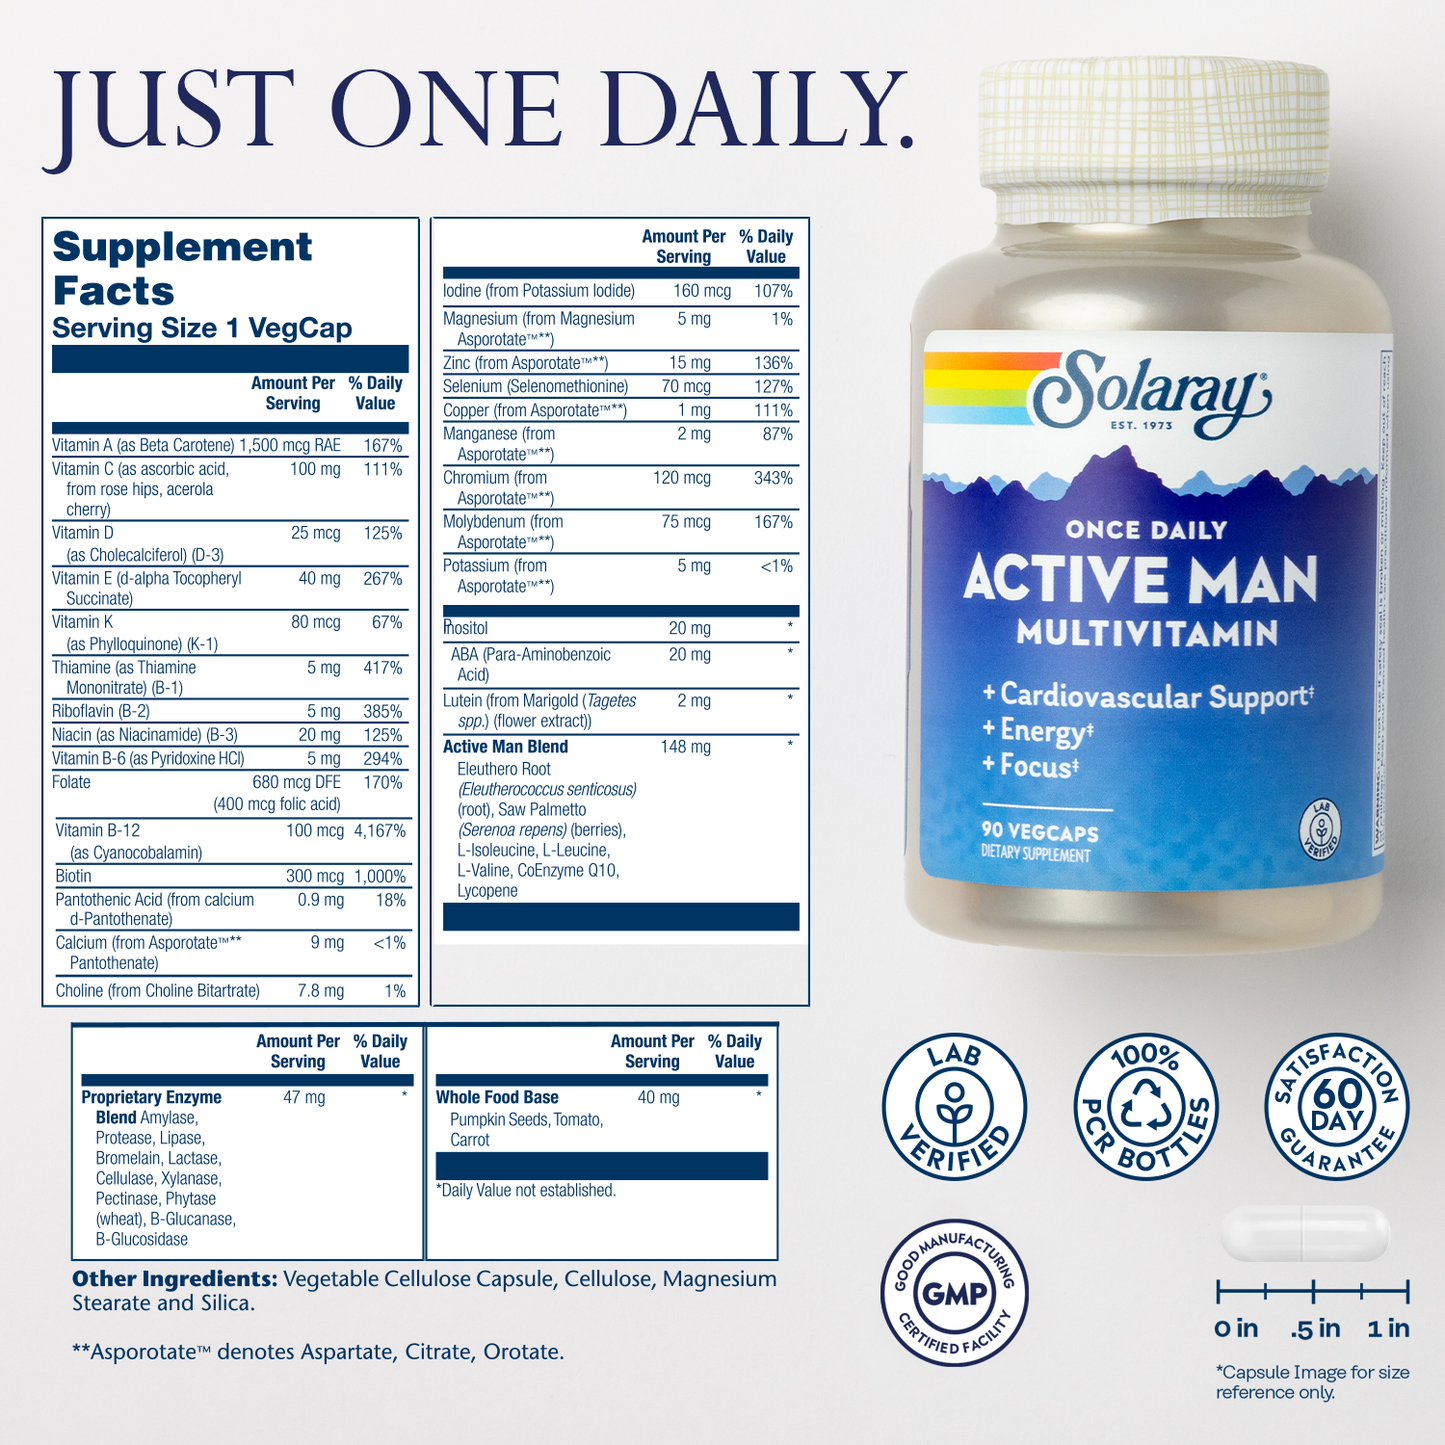 Solaray Once Daily Active Man Multivitamin & Mineral, Multivitamin for Cardiovascular, Support, Energy & Focus, Digestive Enzyme Blend, Amino Acids and Whole Food Base, 90 Servings, 90 VegCaps